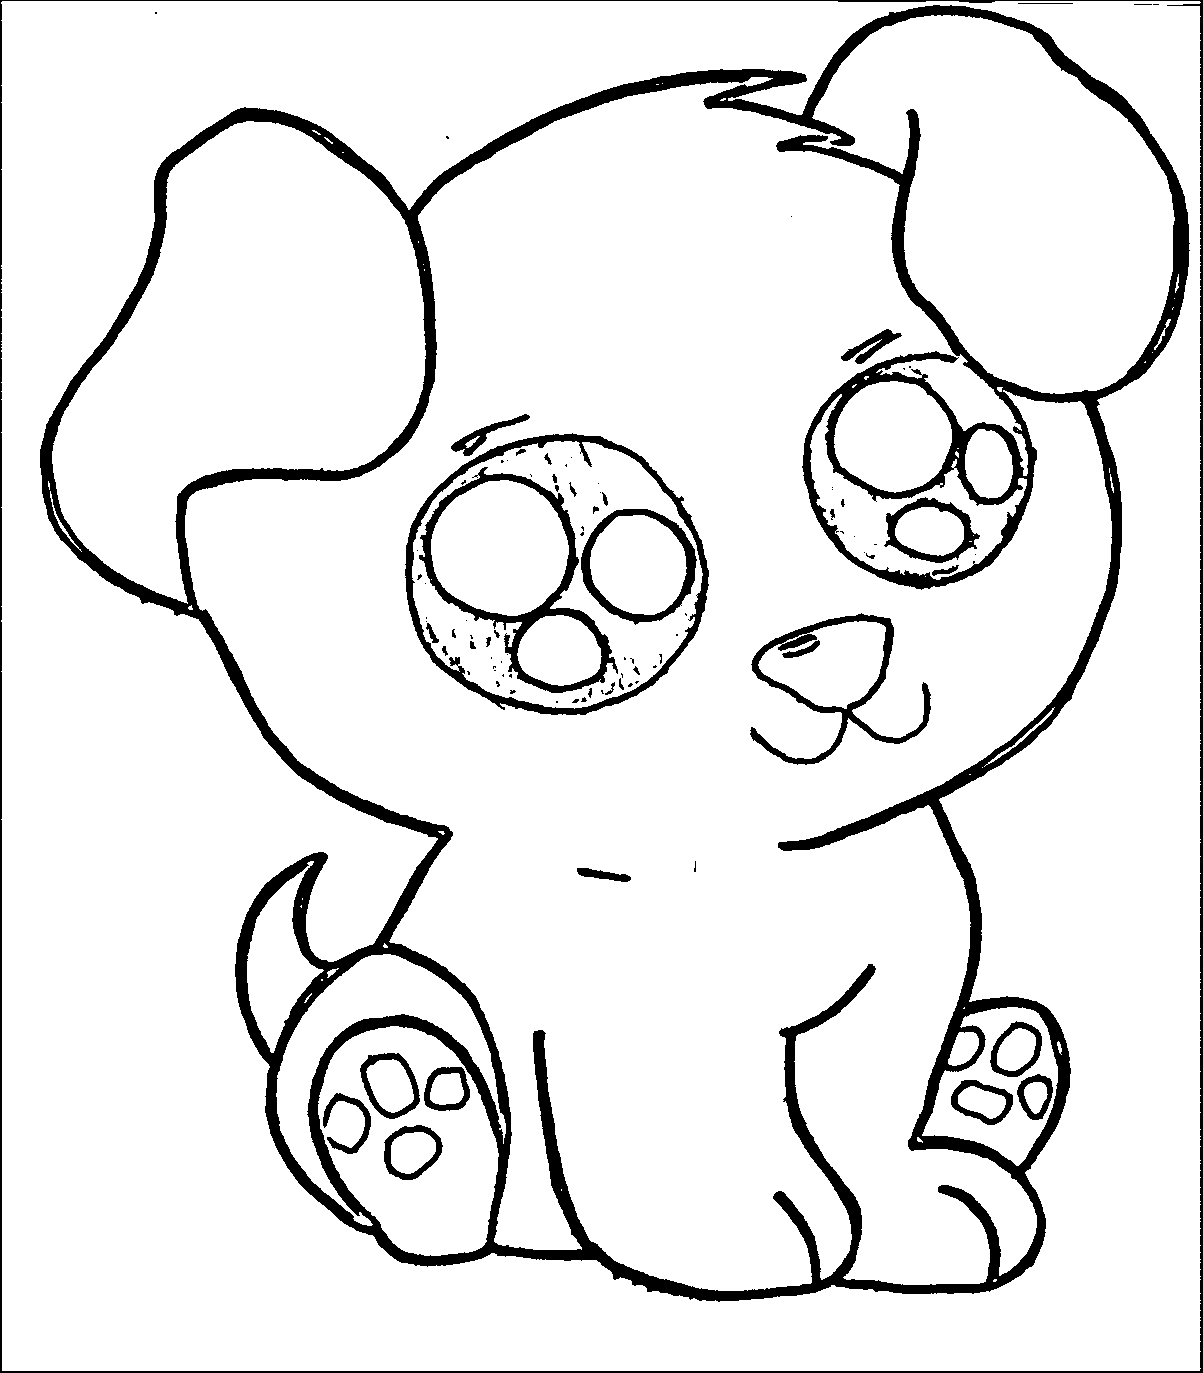 Free Coloring Pages With Cute Puppies Download Free Clip Art Free Clip Art On Clipart Library